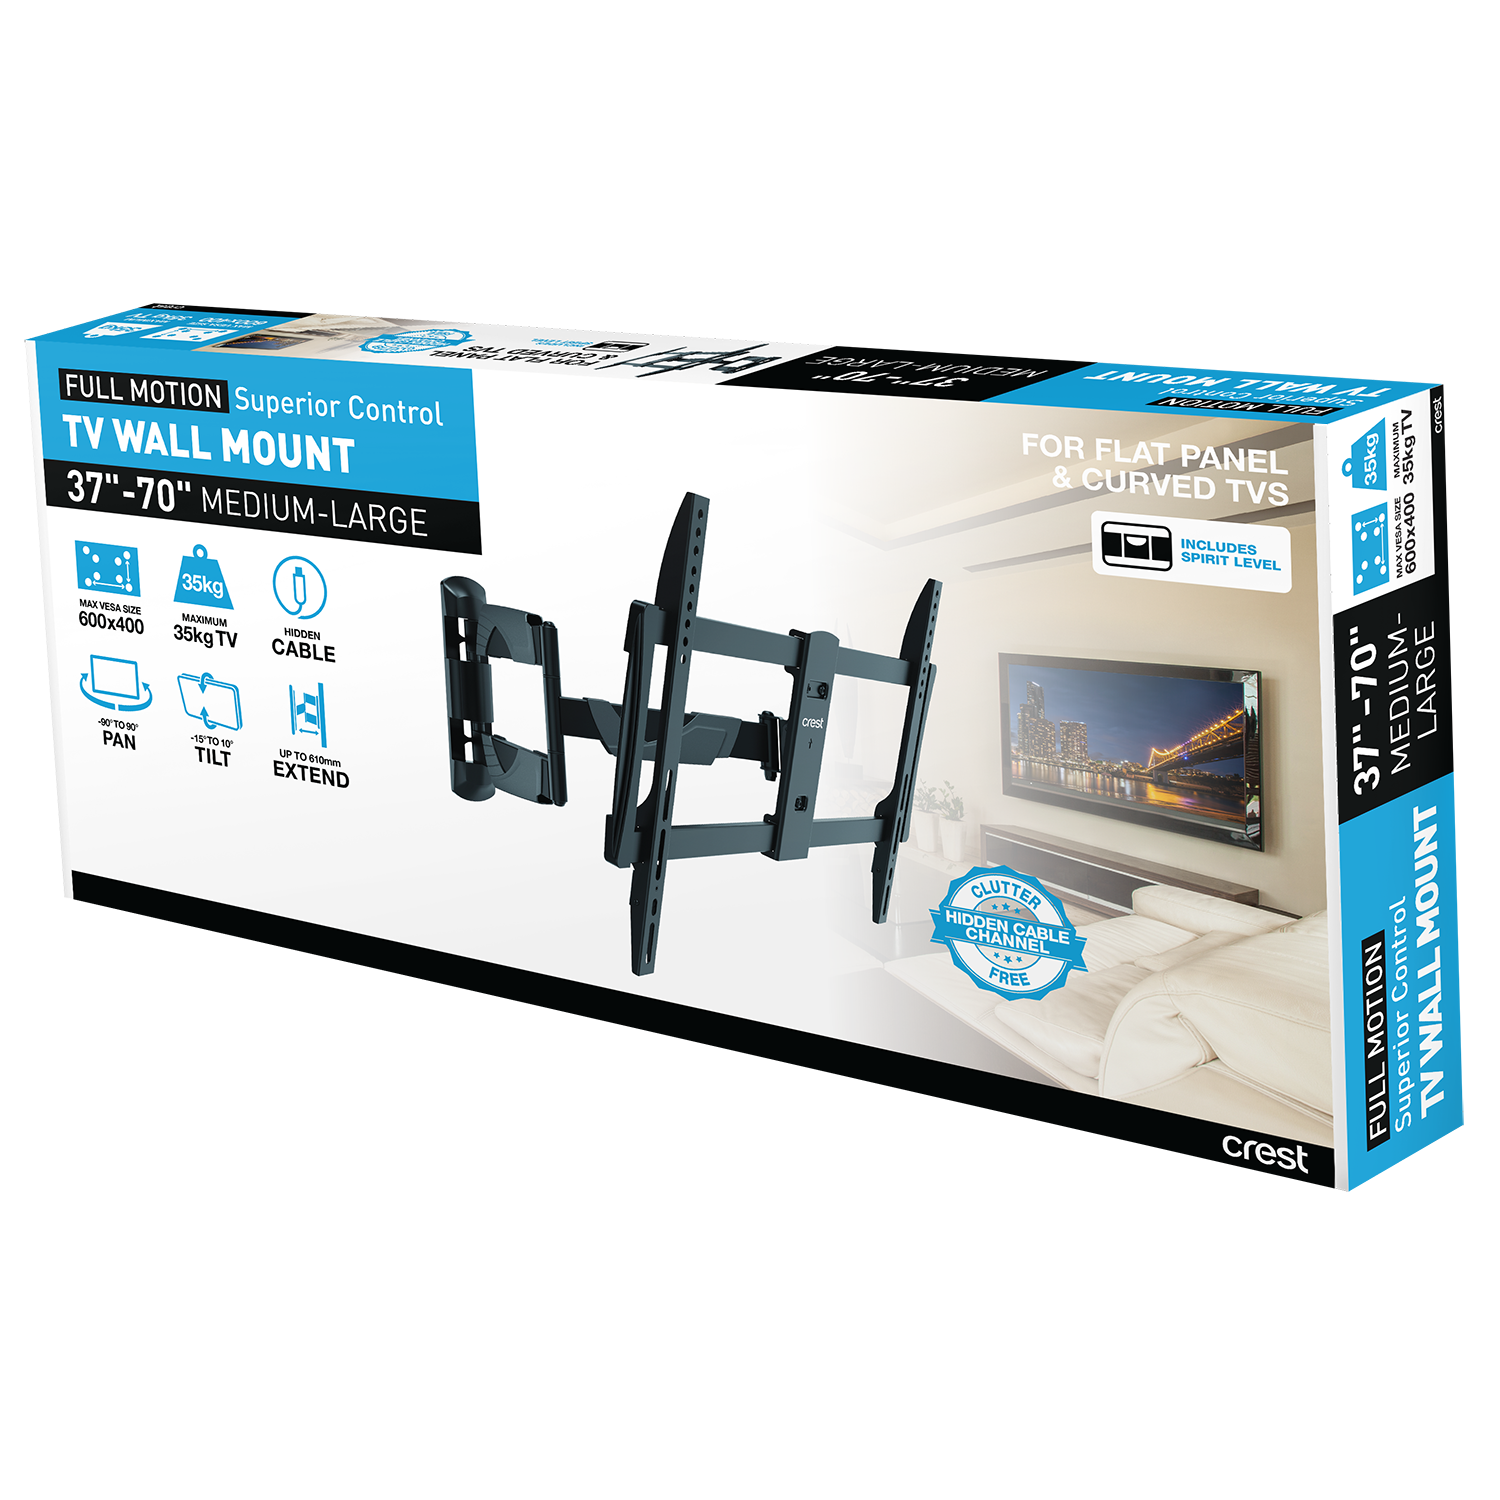 Full Motion TV Wall Mount Superior Control - 37" - 70"